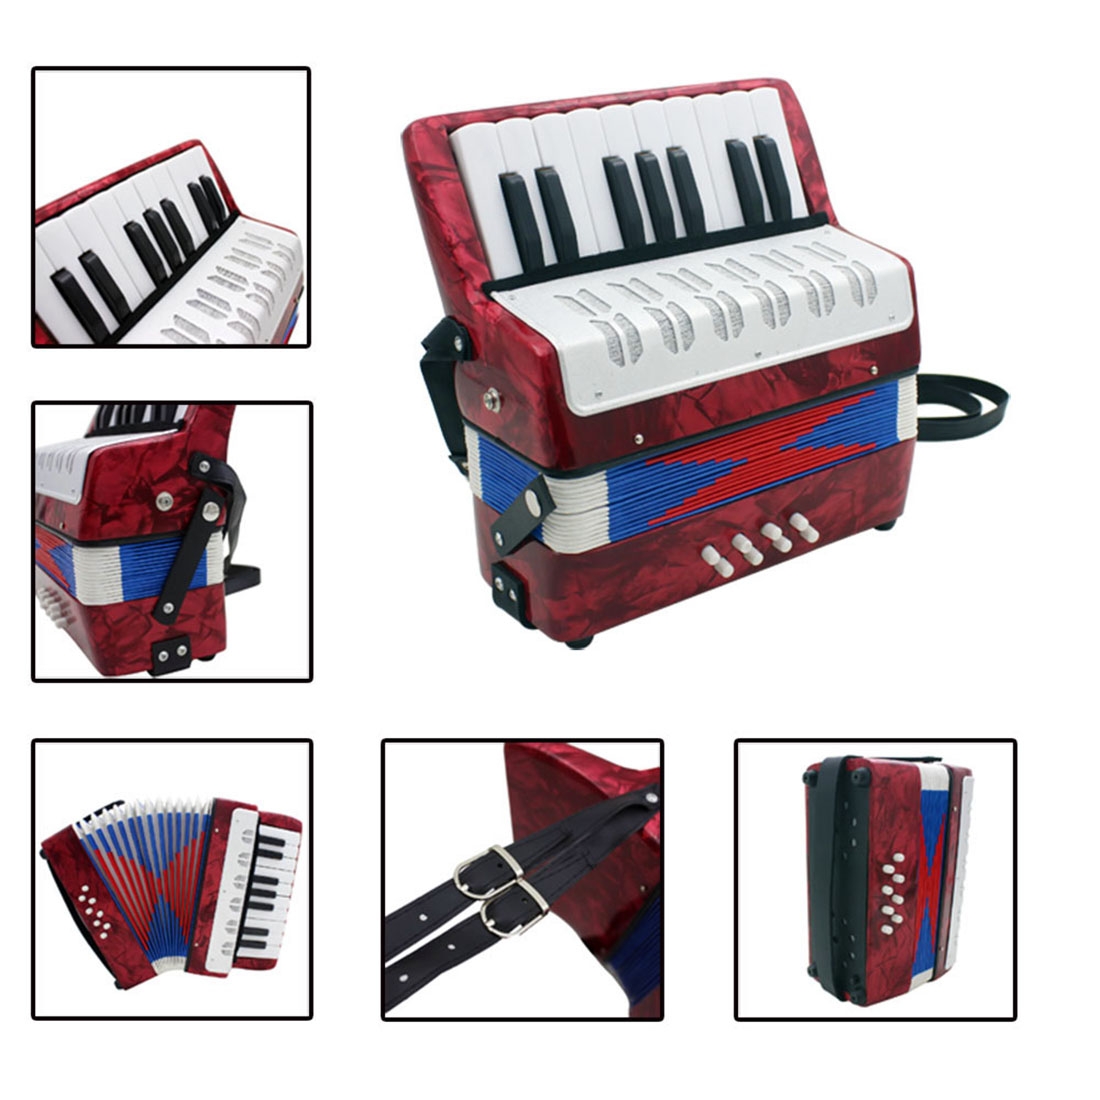 Professional 17 Key Mini Accordion Educational Musical Instrument Toy Cadence Band for Kids Children Adults Gift